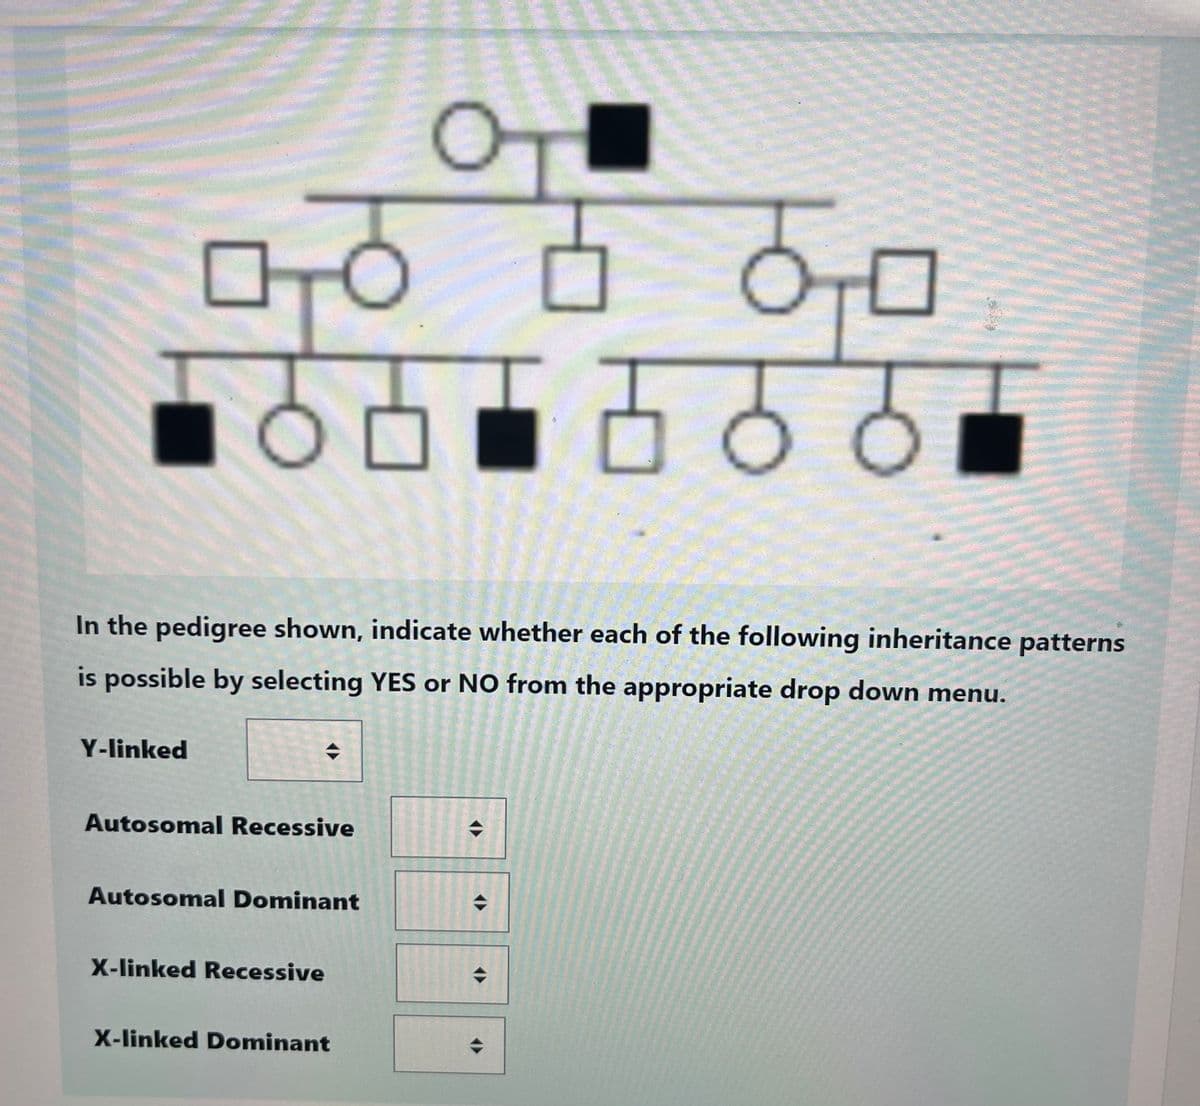 Y-linked
ㅁㅇ
O
ㅇㅁ
In the pedigree shown, indicate whether each of the following inheritance patterns
is possible by selecting YES or NO from the appropriate drop down menu.
Autosomal Recessive
Autosomal Dominant
X-linked Recessive
X-linked Dominant
◆
마음
(>>
01